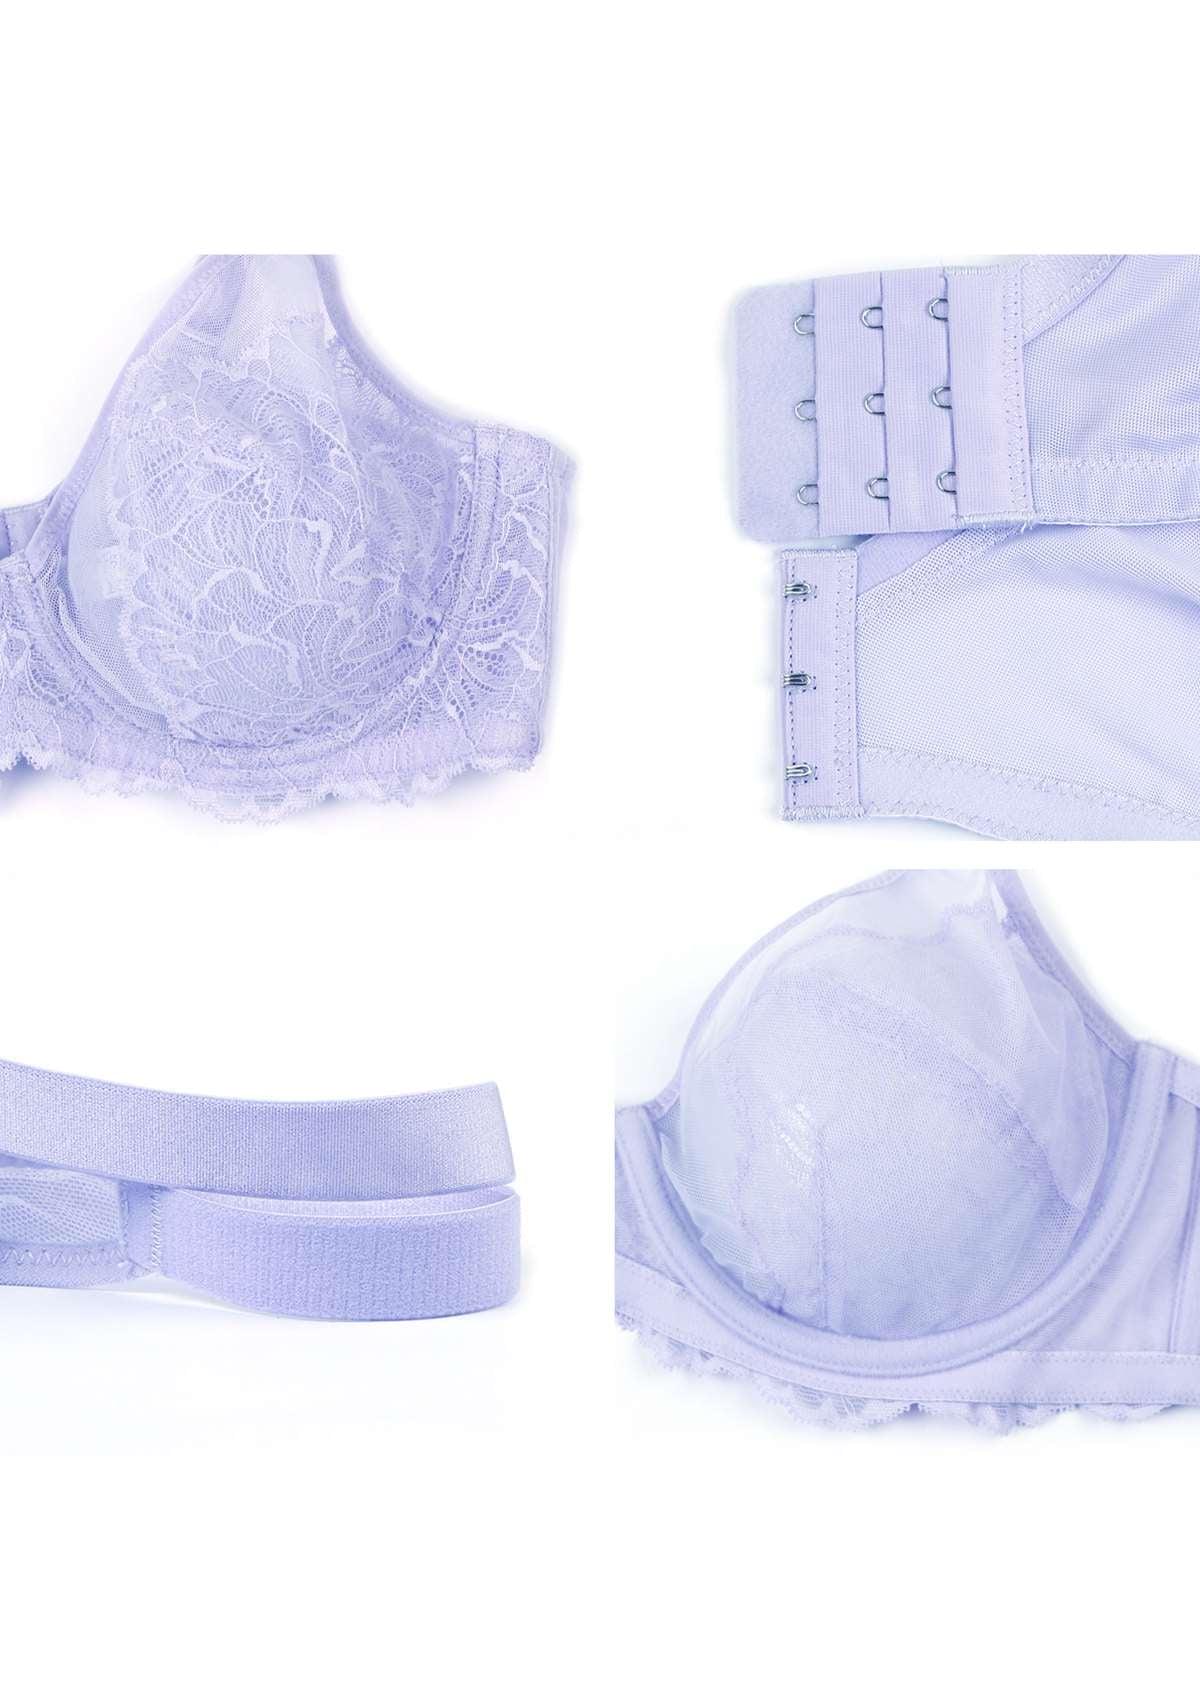 HSIA Blossom Transparent Lace Bra: Plus Size Wired Back Smoothing Bra - Light Purple / 38 / H